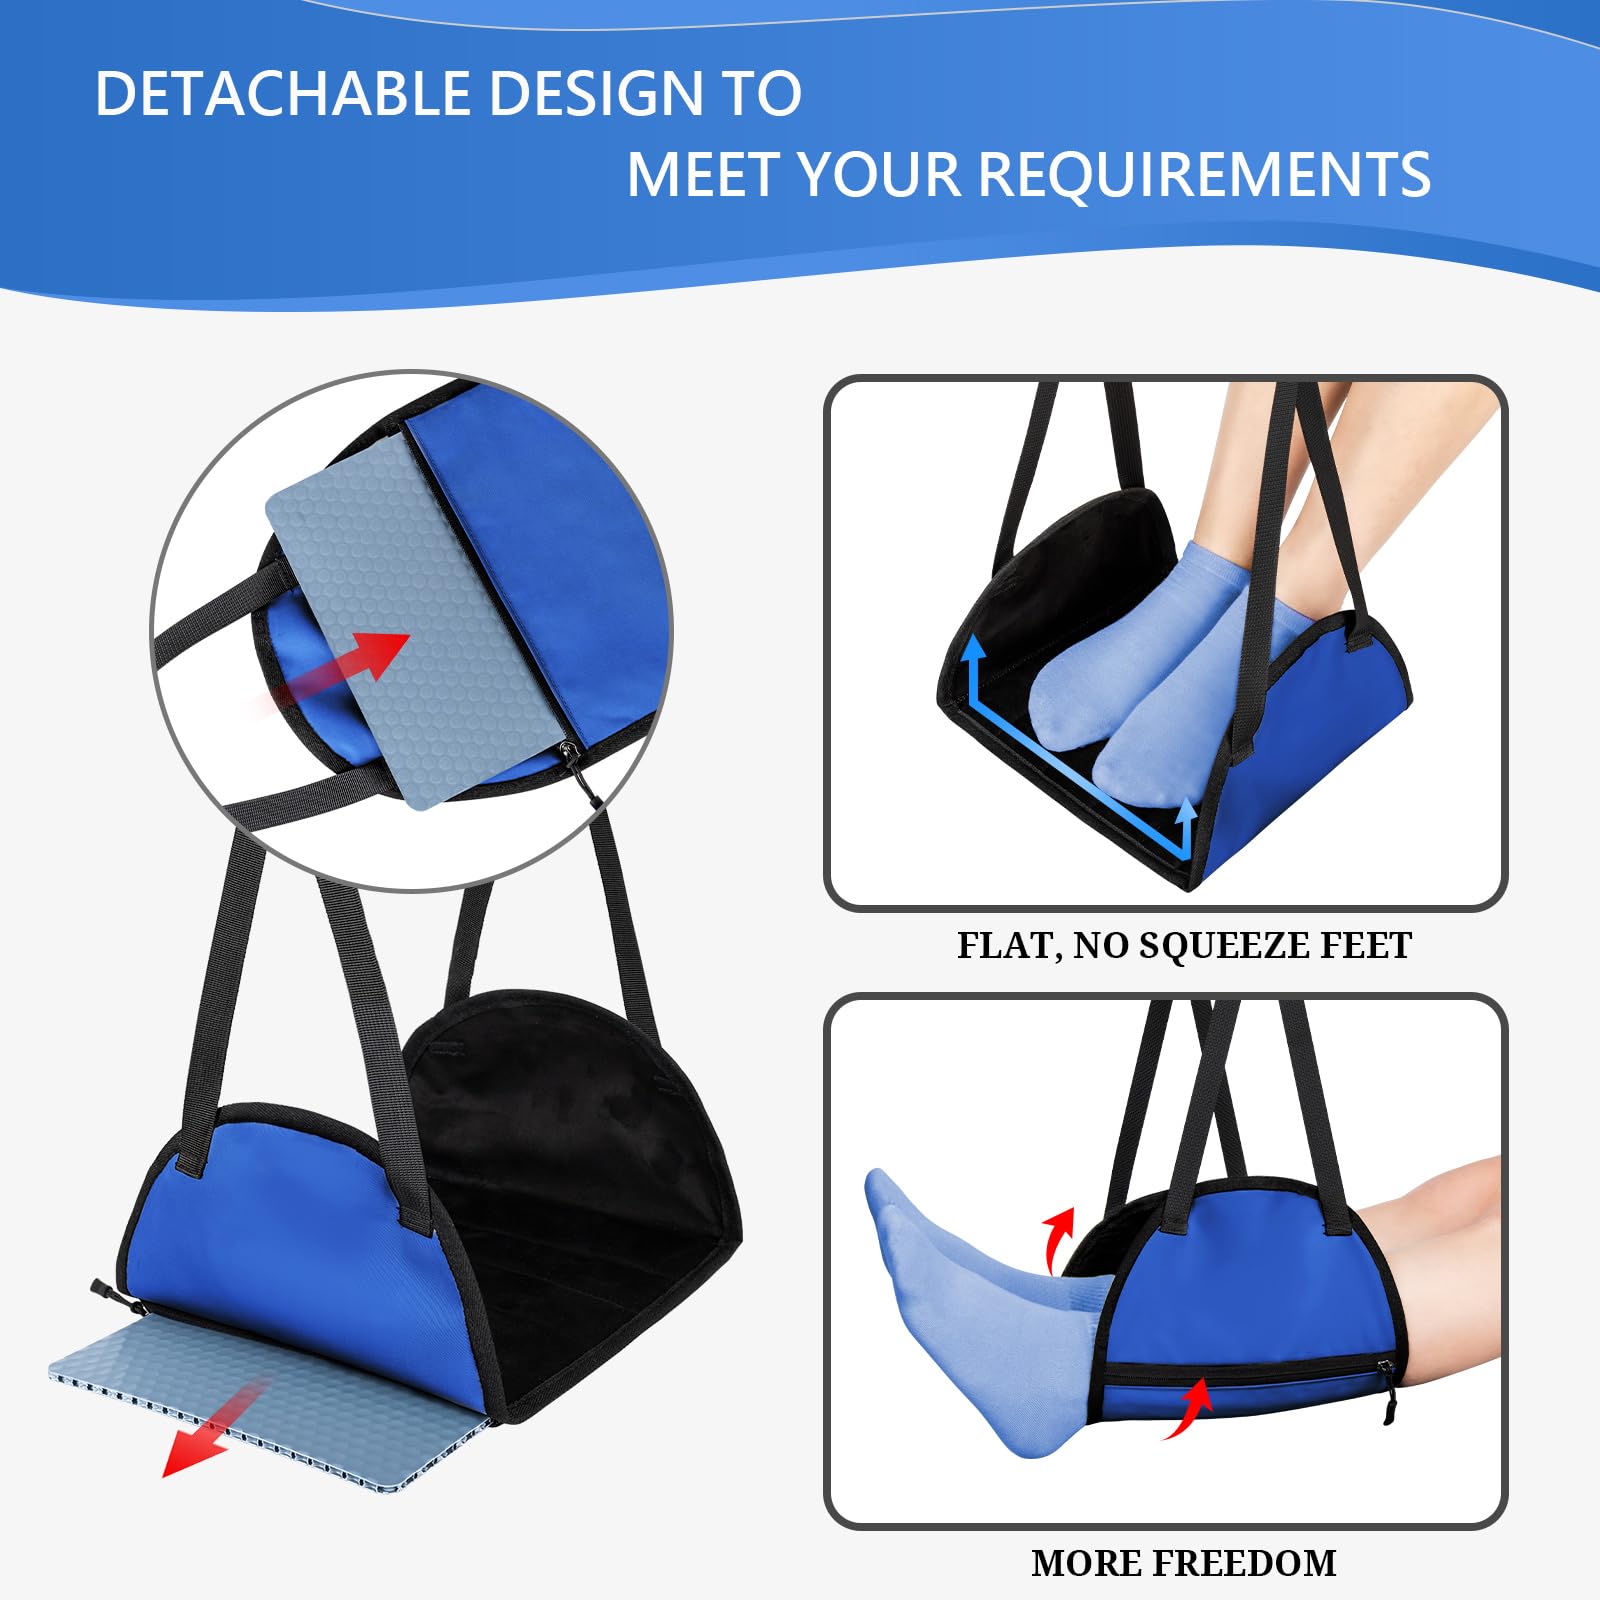 HAYVAN Airplane Footrest with Comfortable Latex Cushion for Long Flights - Portable Adjustable Airplane Desk Foot Hammock to Relax Your Feet and Leg in Plane, Office, Home (Blue)